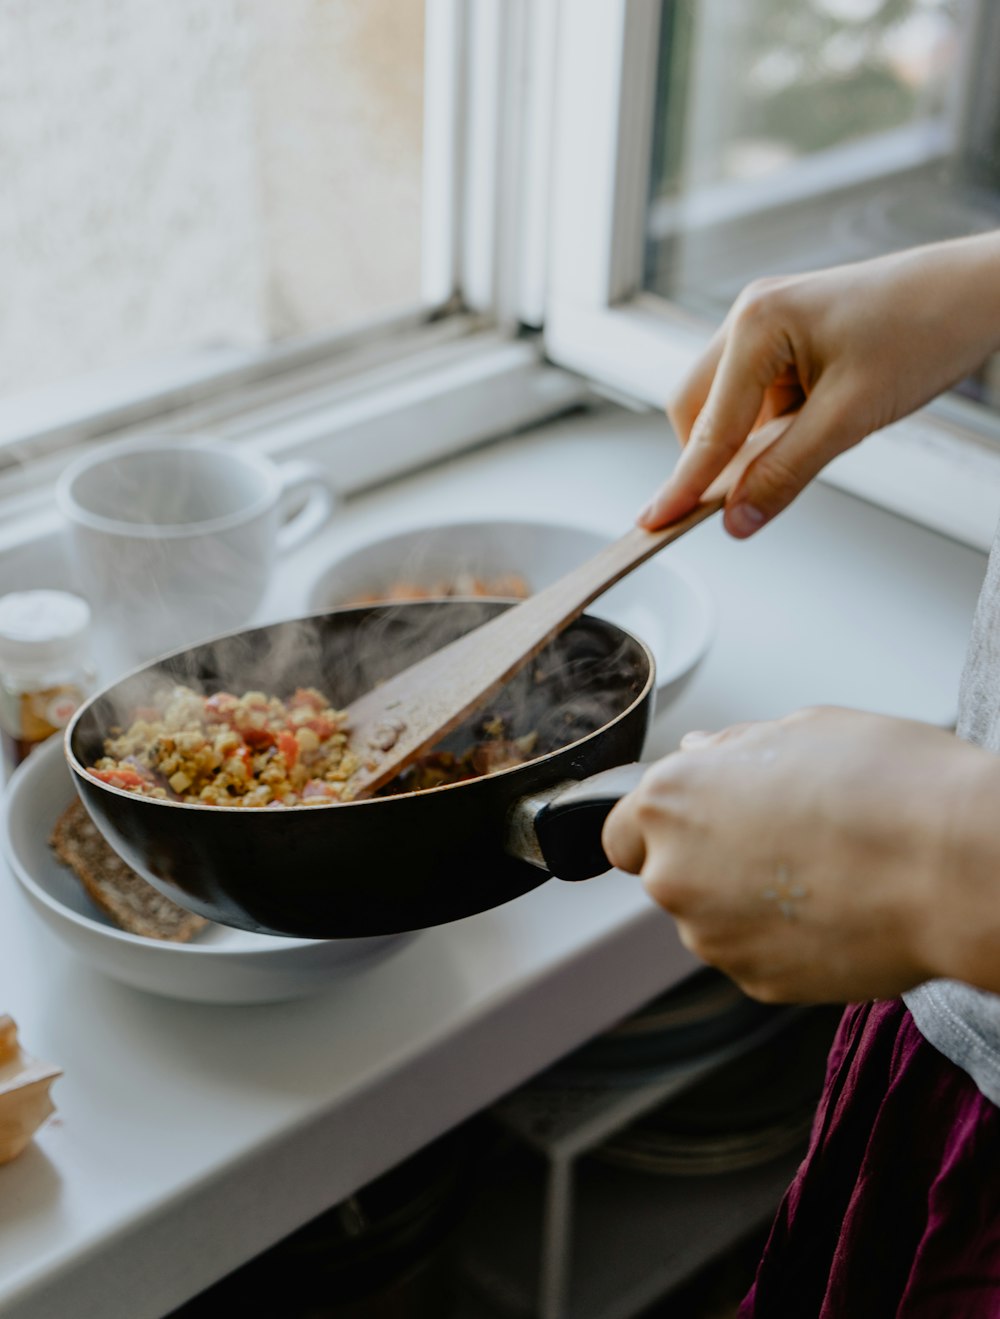 Best 500+ Cooking Images | Download Free Pictures on Unsplash